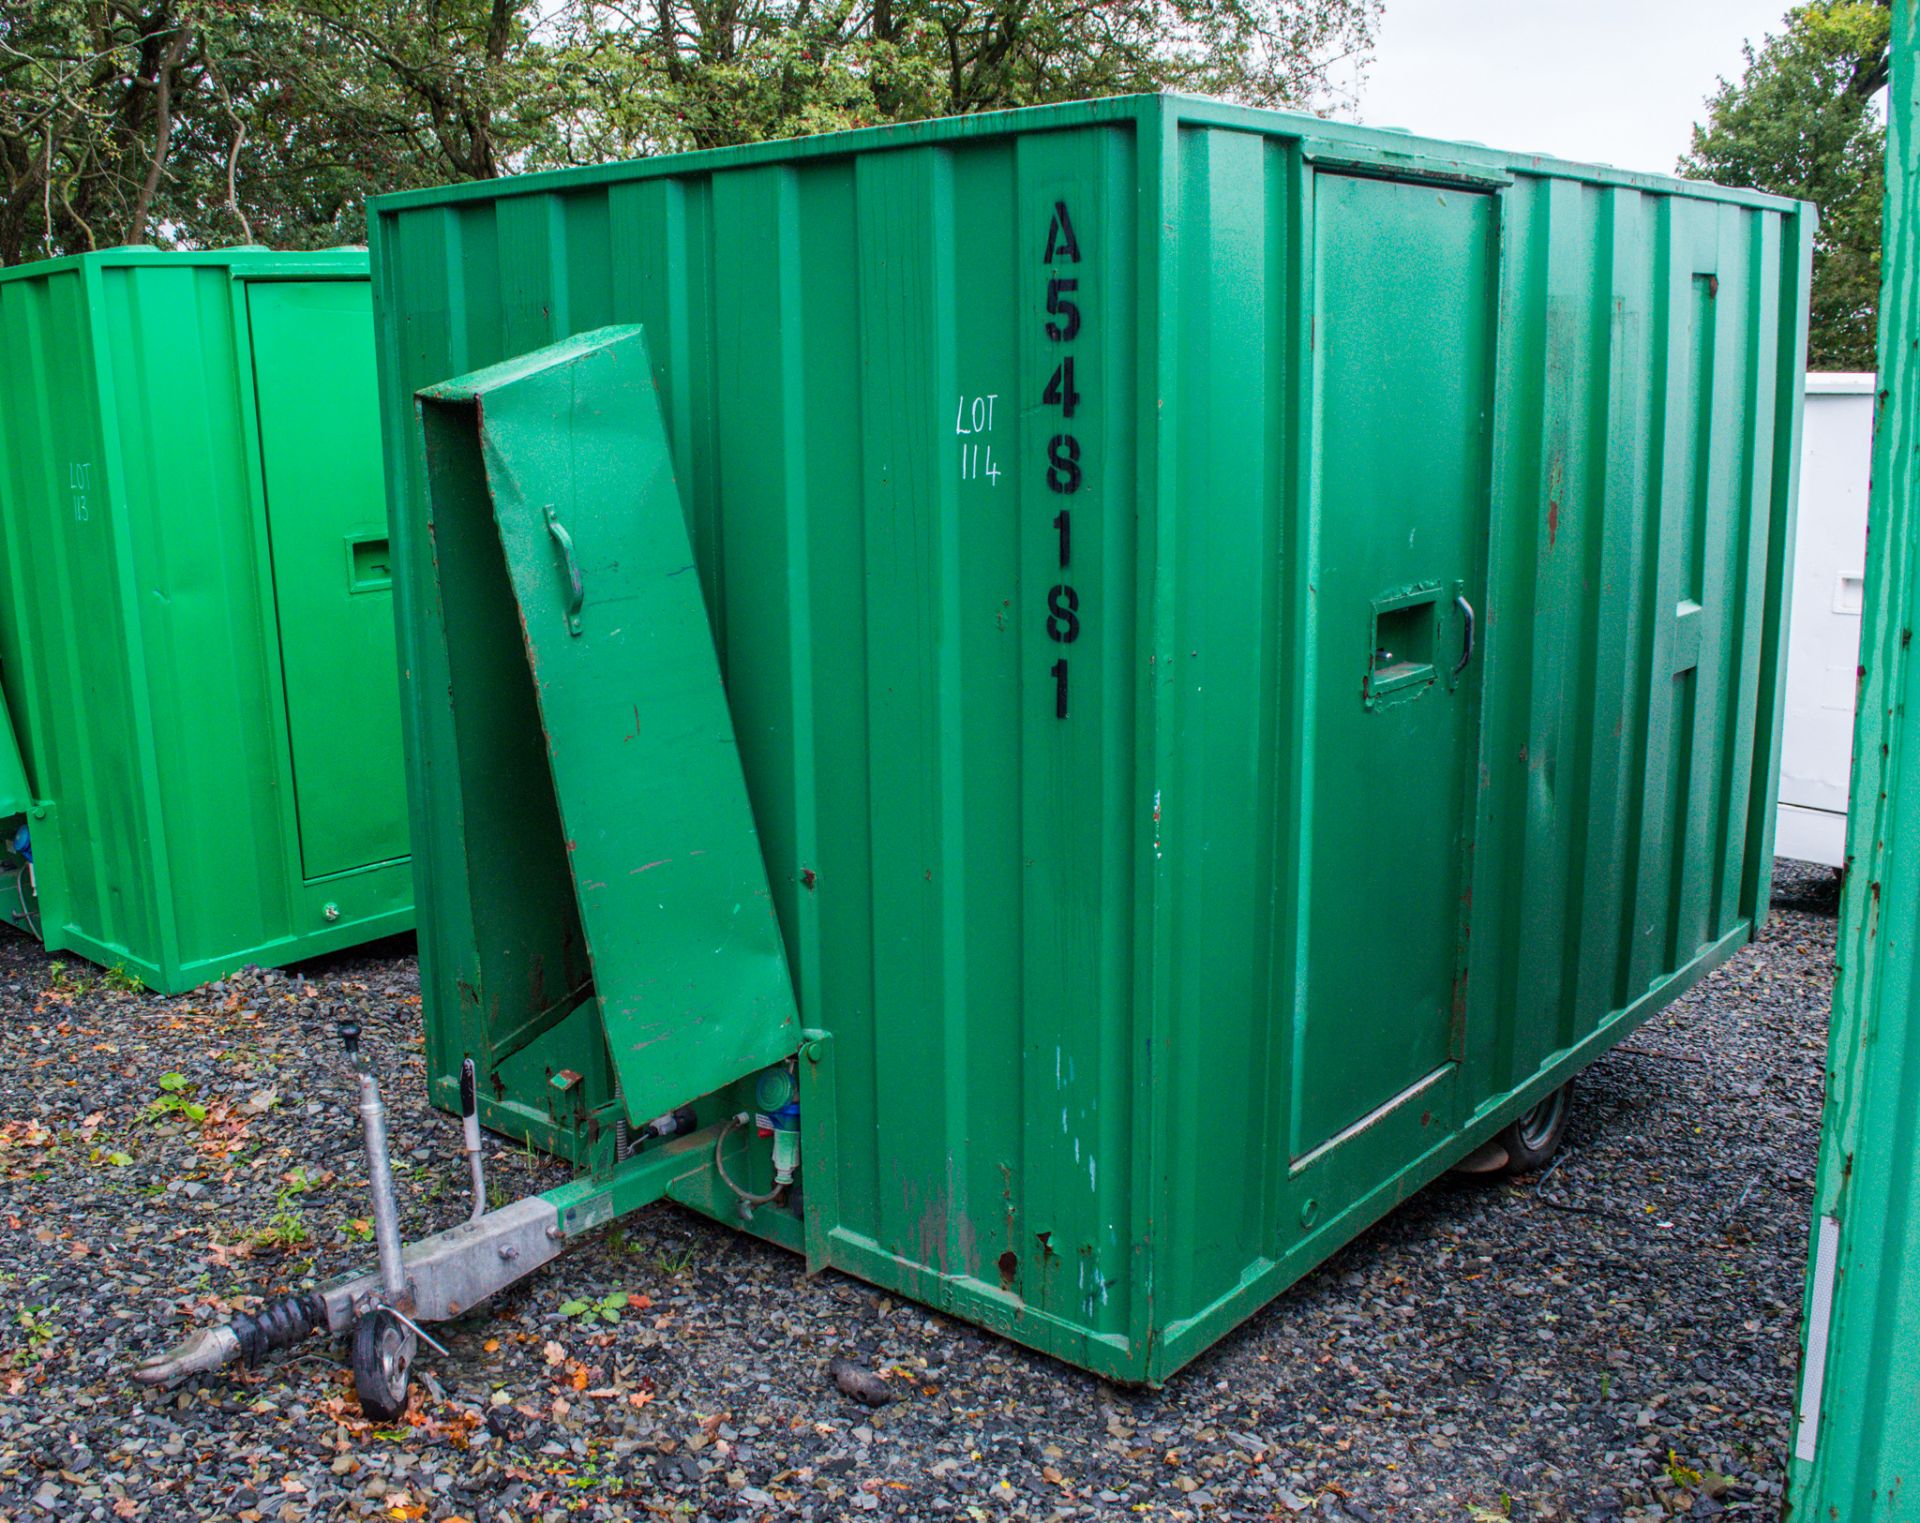 Ground Hog 12' by 8' fast tow self lowering welfare unit    c/w canteen area, toilet room, generator